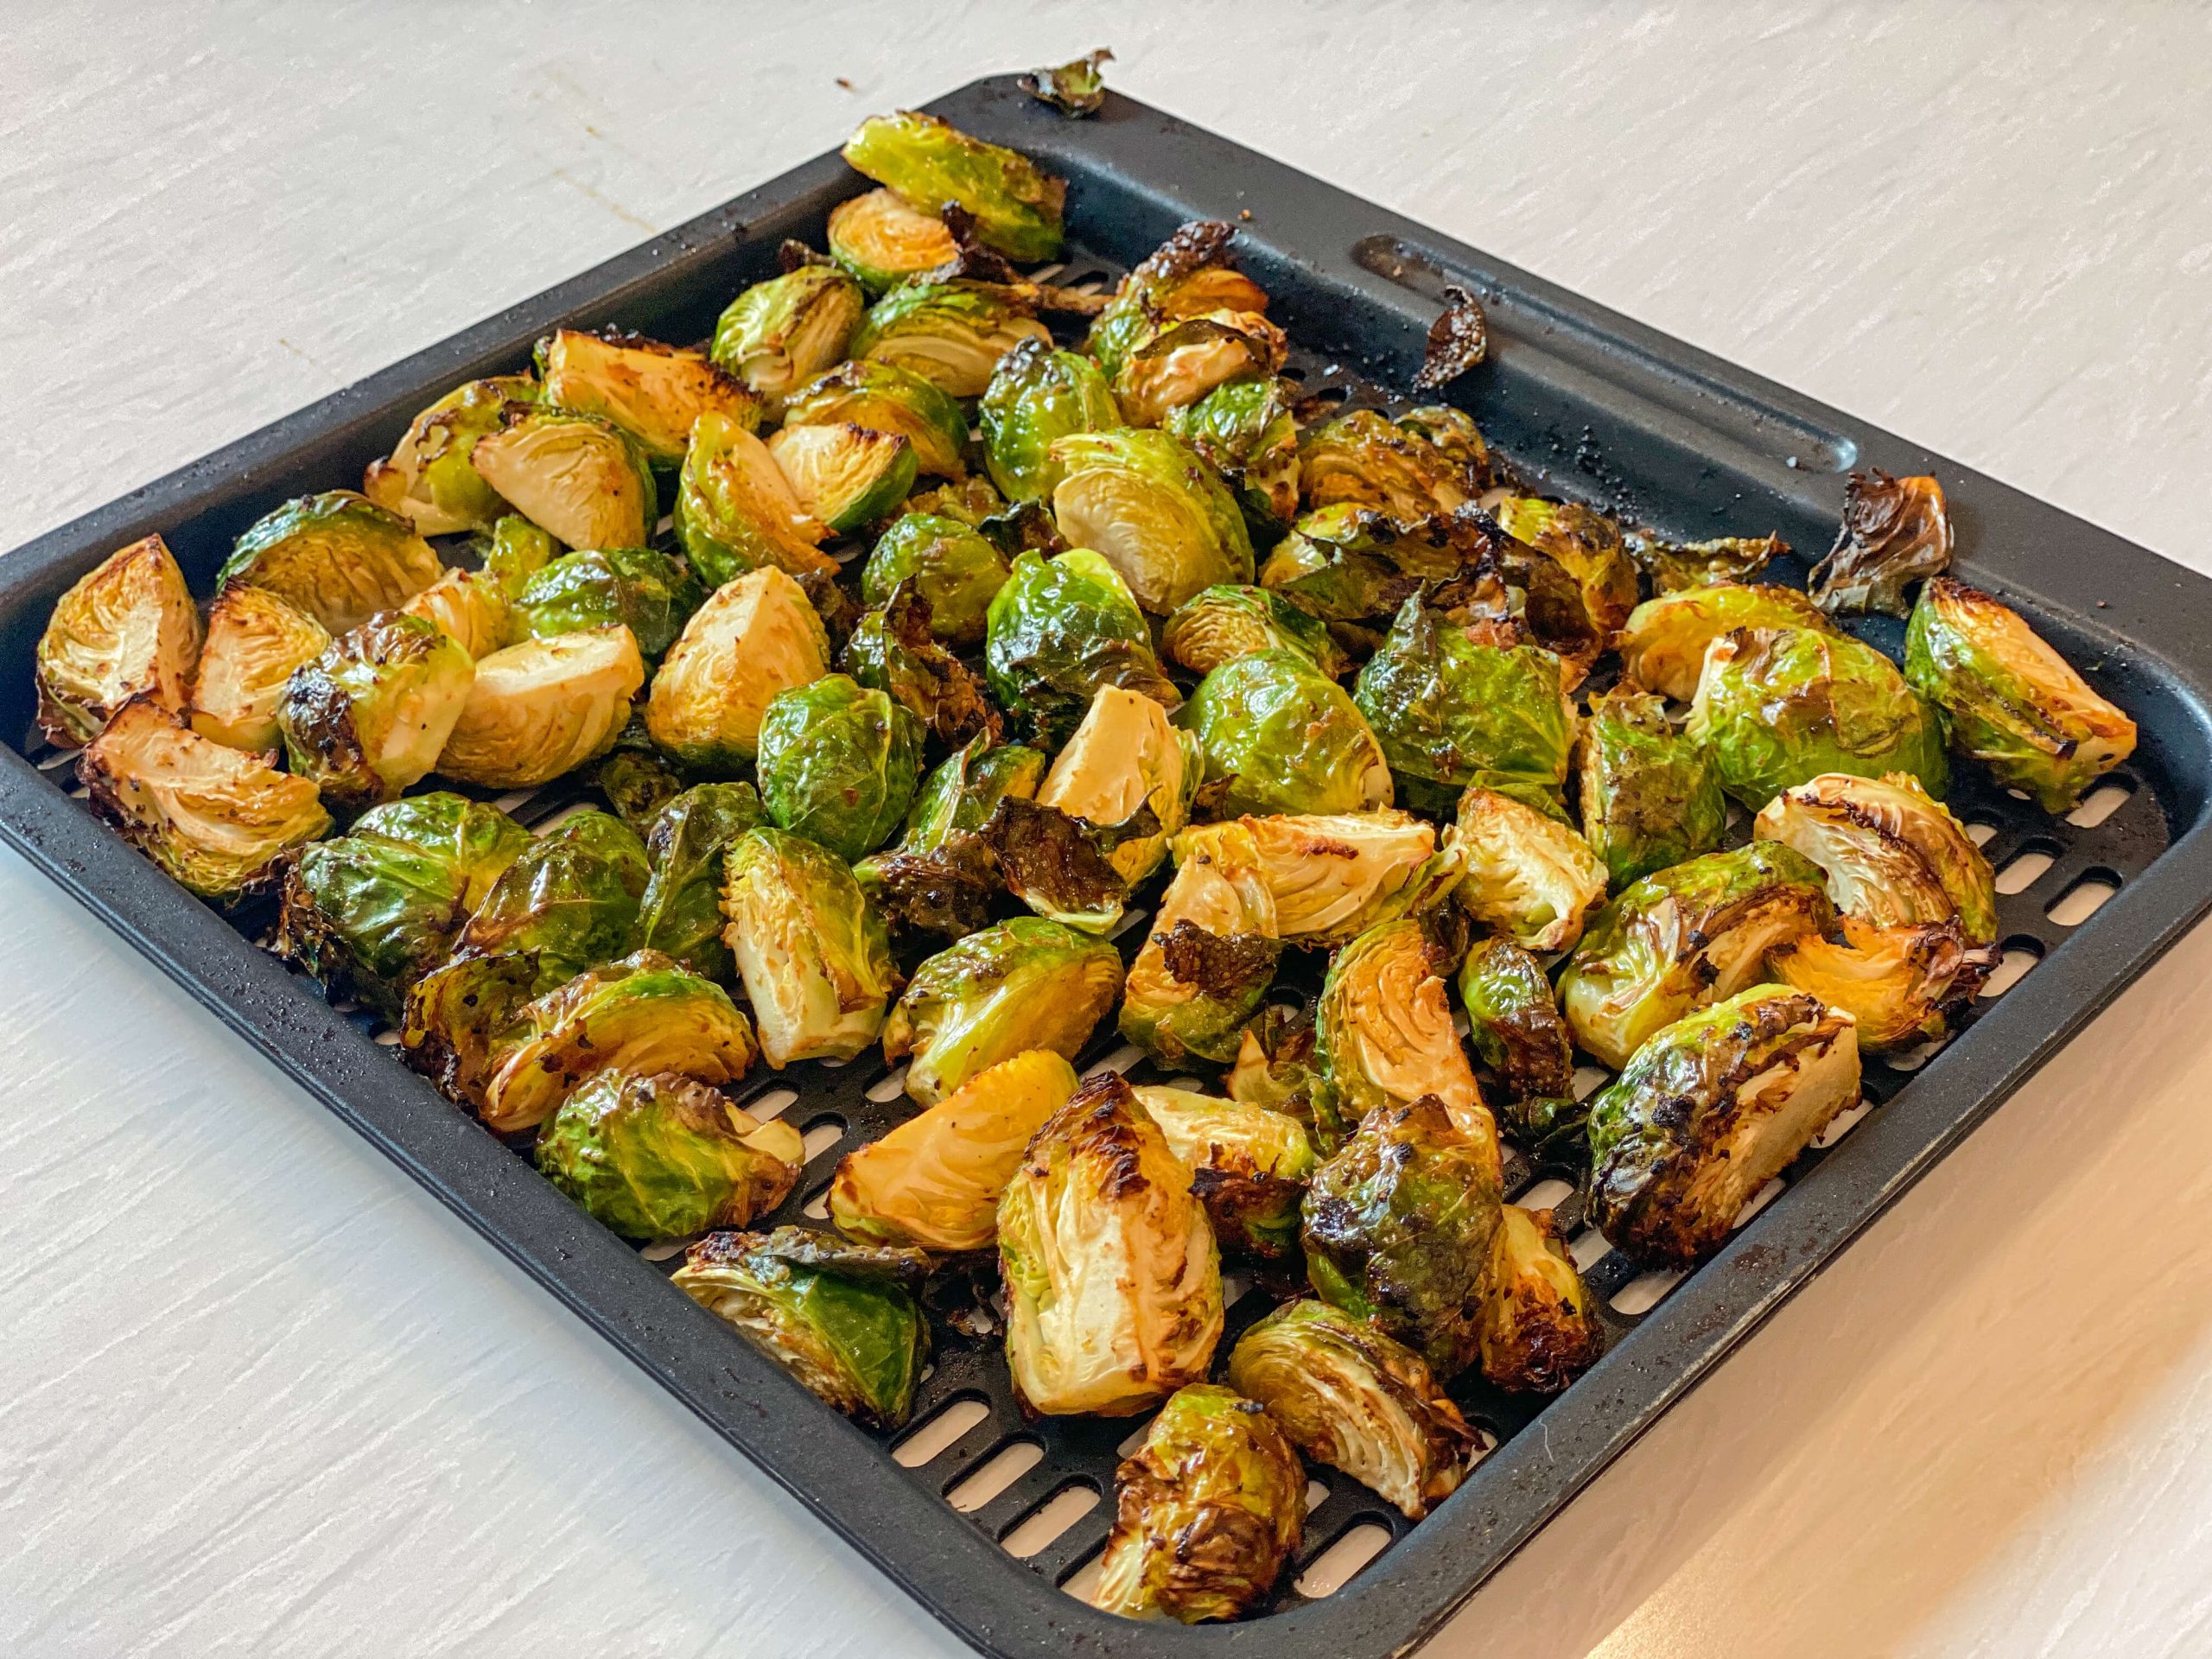 Cooked brussel sprouts air fried and crispy